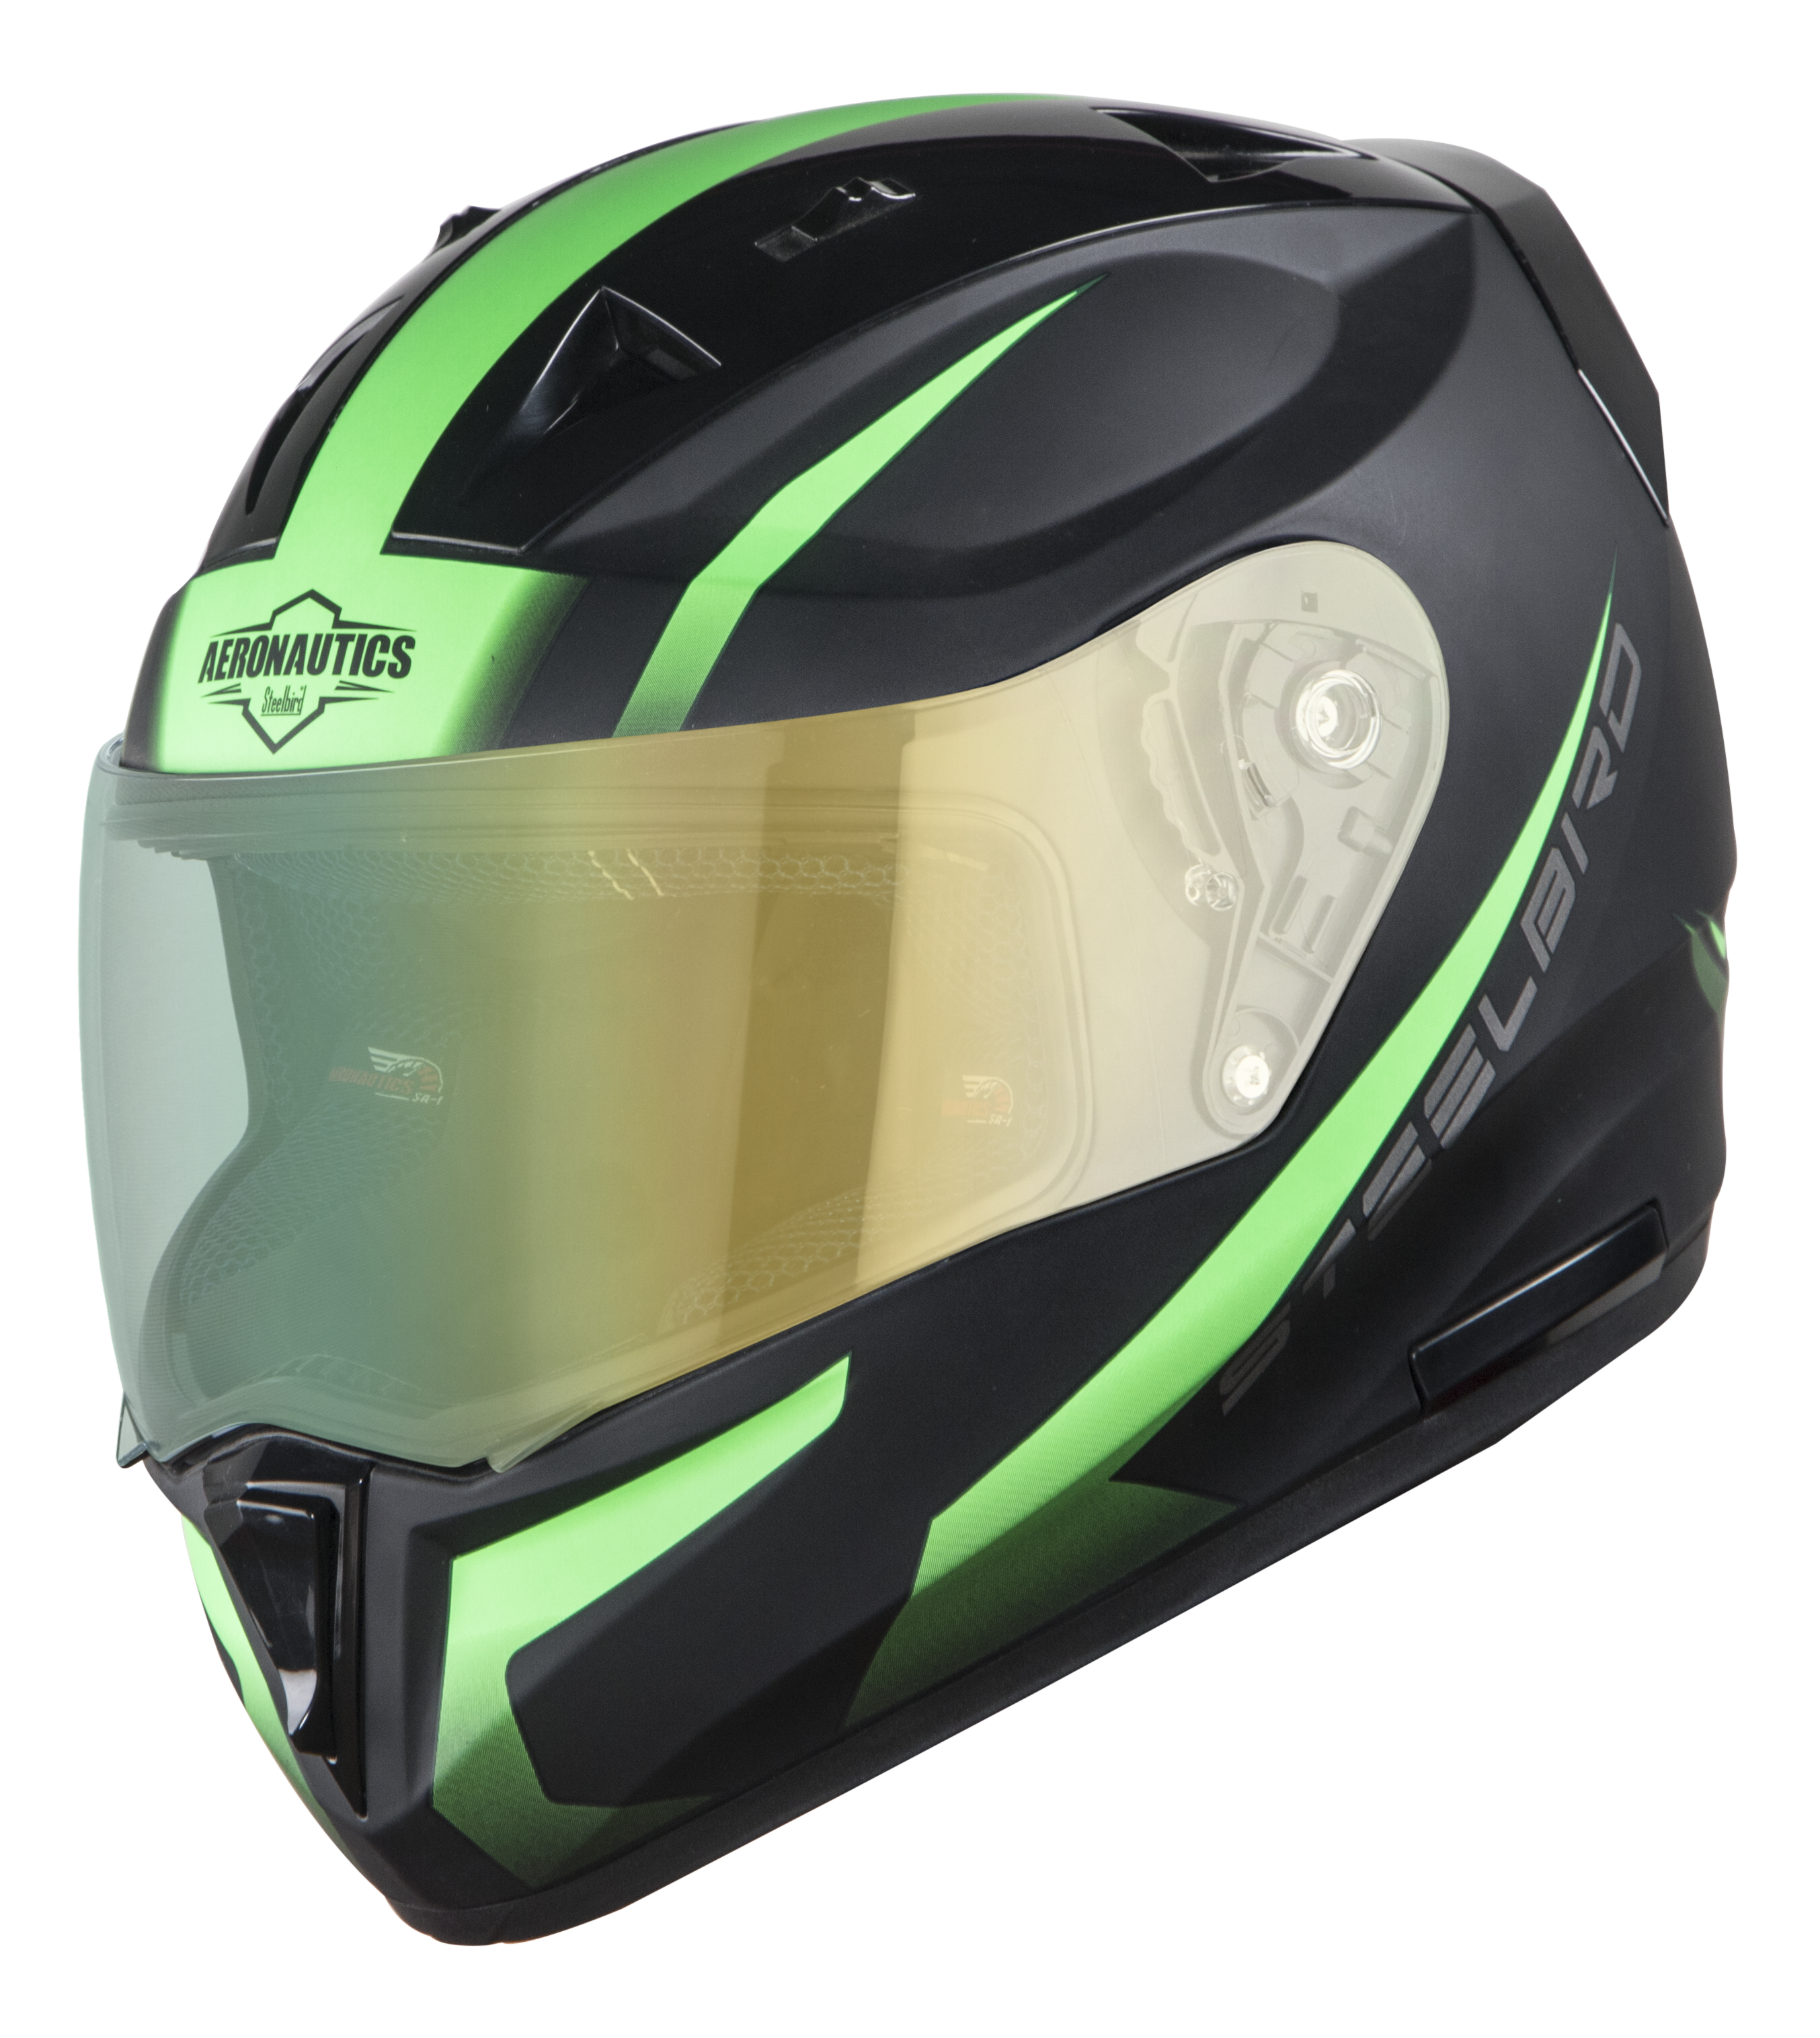 SA-1 WHIF Mat Black With Green (Fitted With Clear Visor Extra Green Night Vison Visor Free)